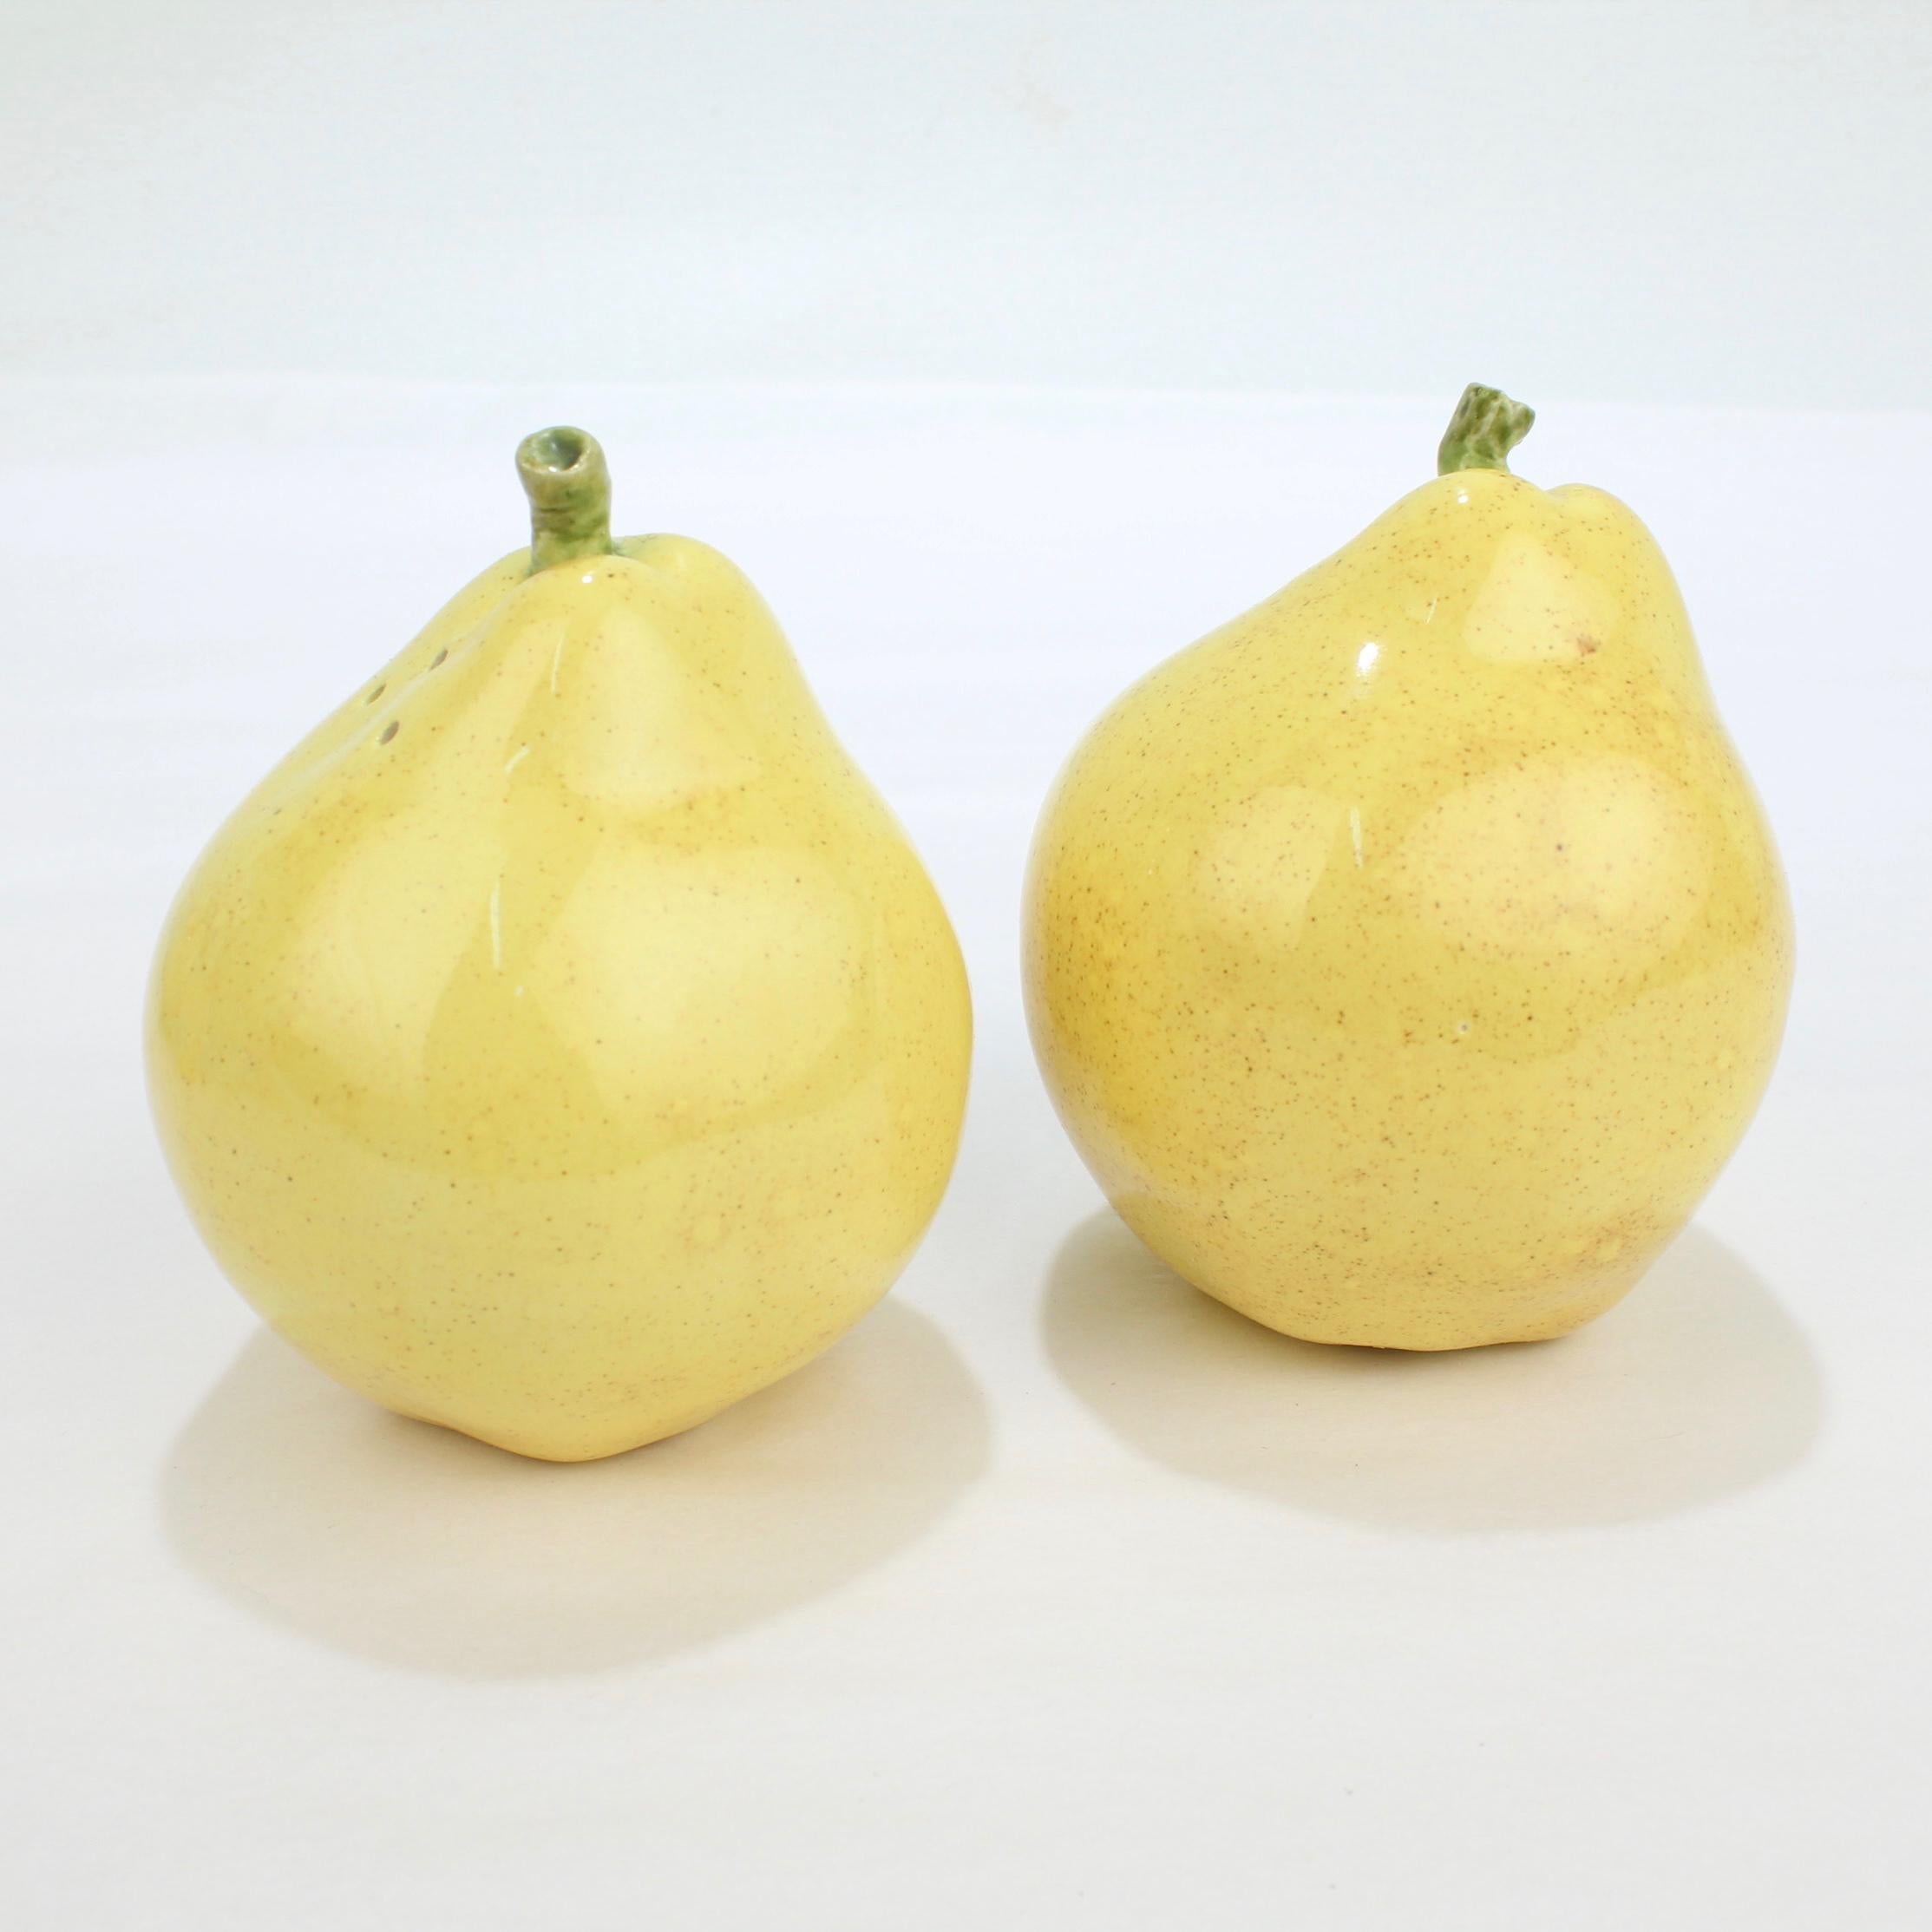 2 Pairs of Pear Shaped Yellow Pottery Salt and Pepper Shakers For Sale 3